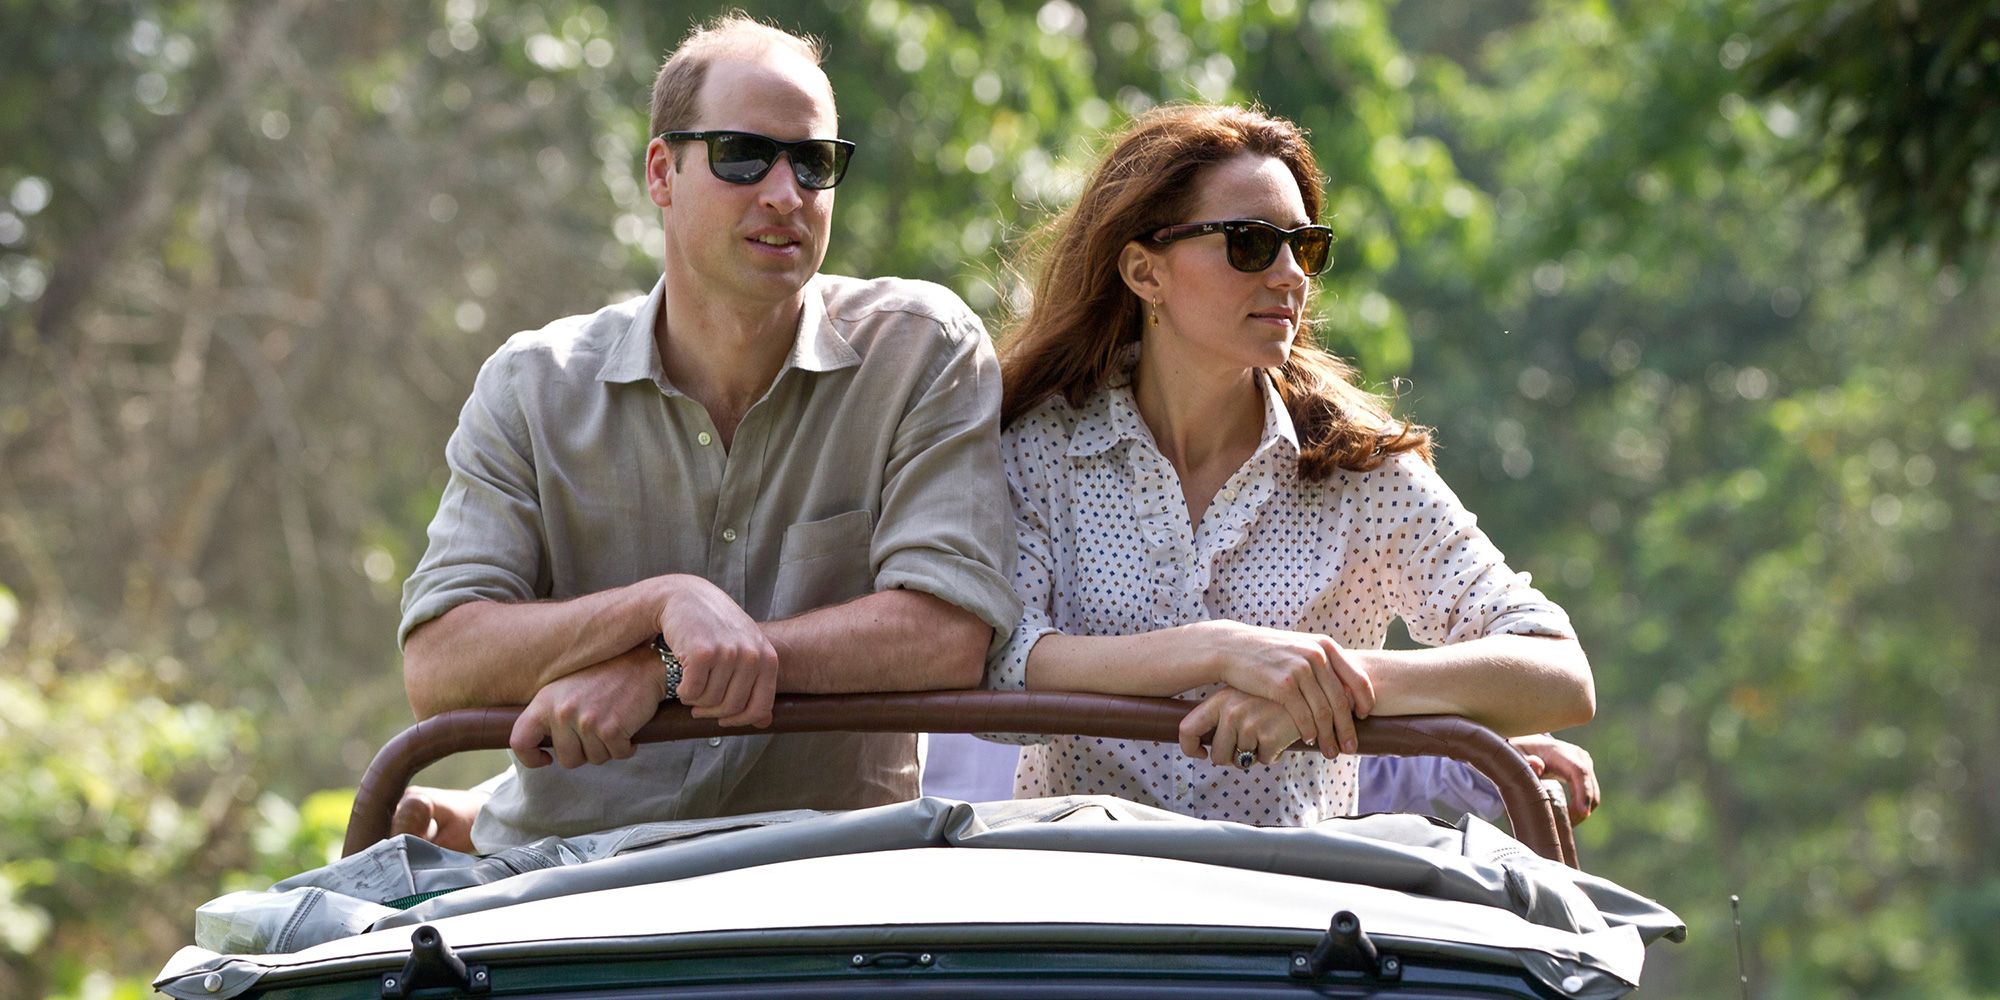 Prince William reveals why Kate Middleton is 'immensely jealous' of his conservation tour